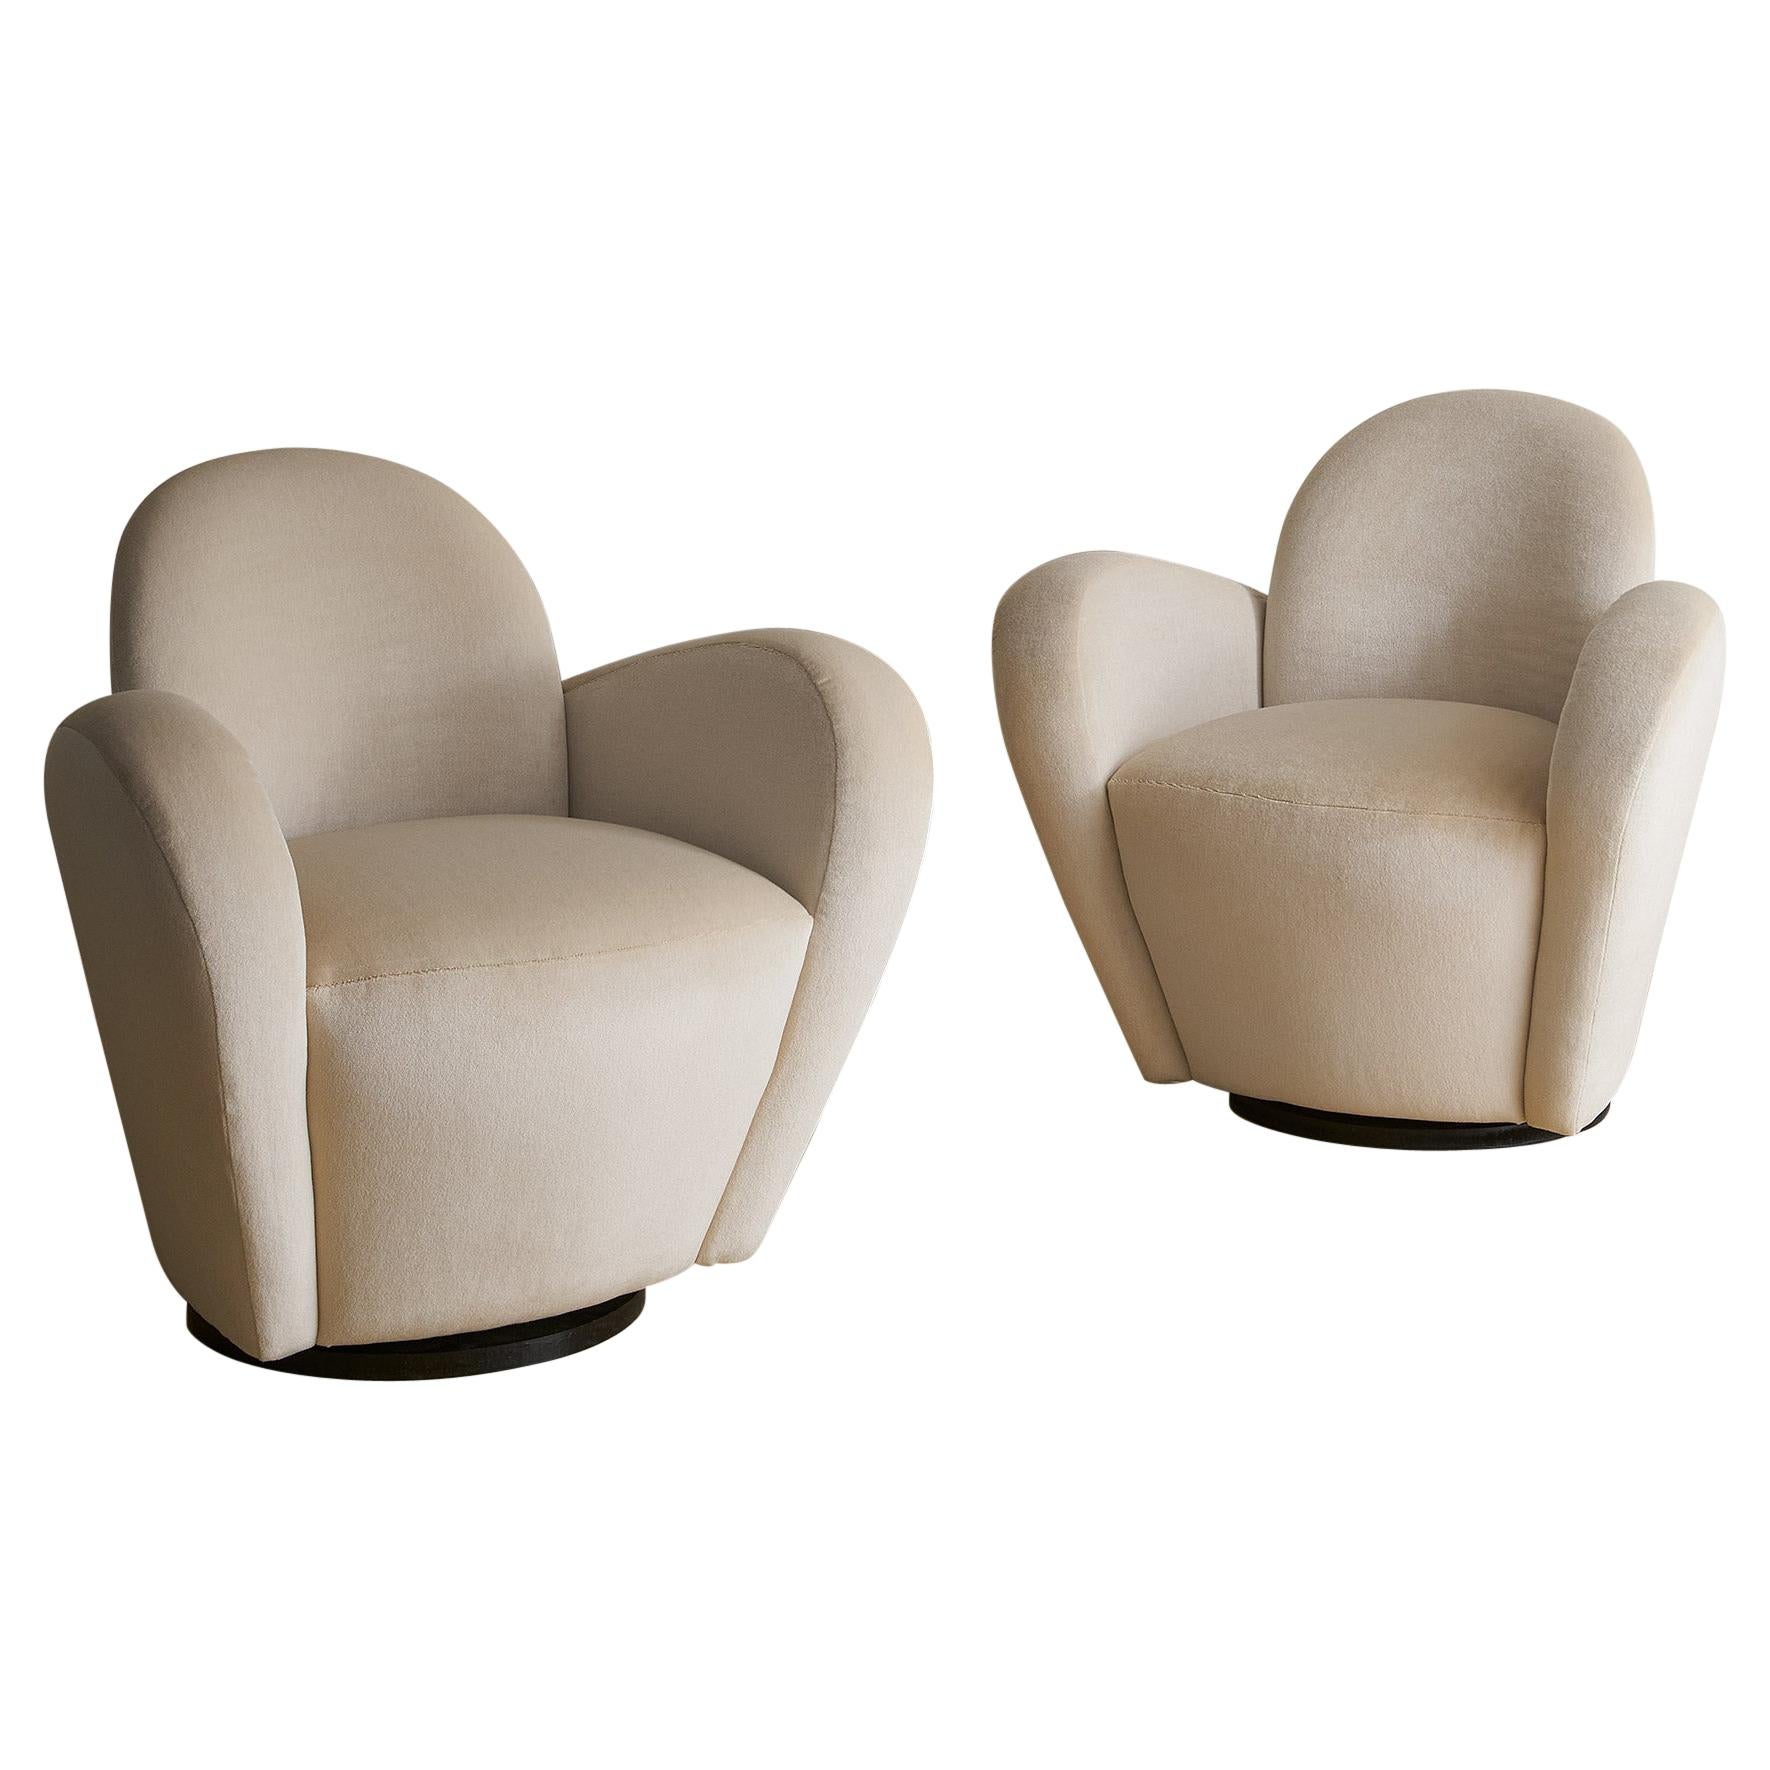 Wraparound Swivel Chair in the style of Vladimir Kagan in Ivory Mohair